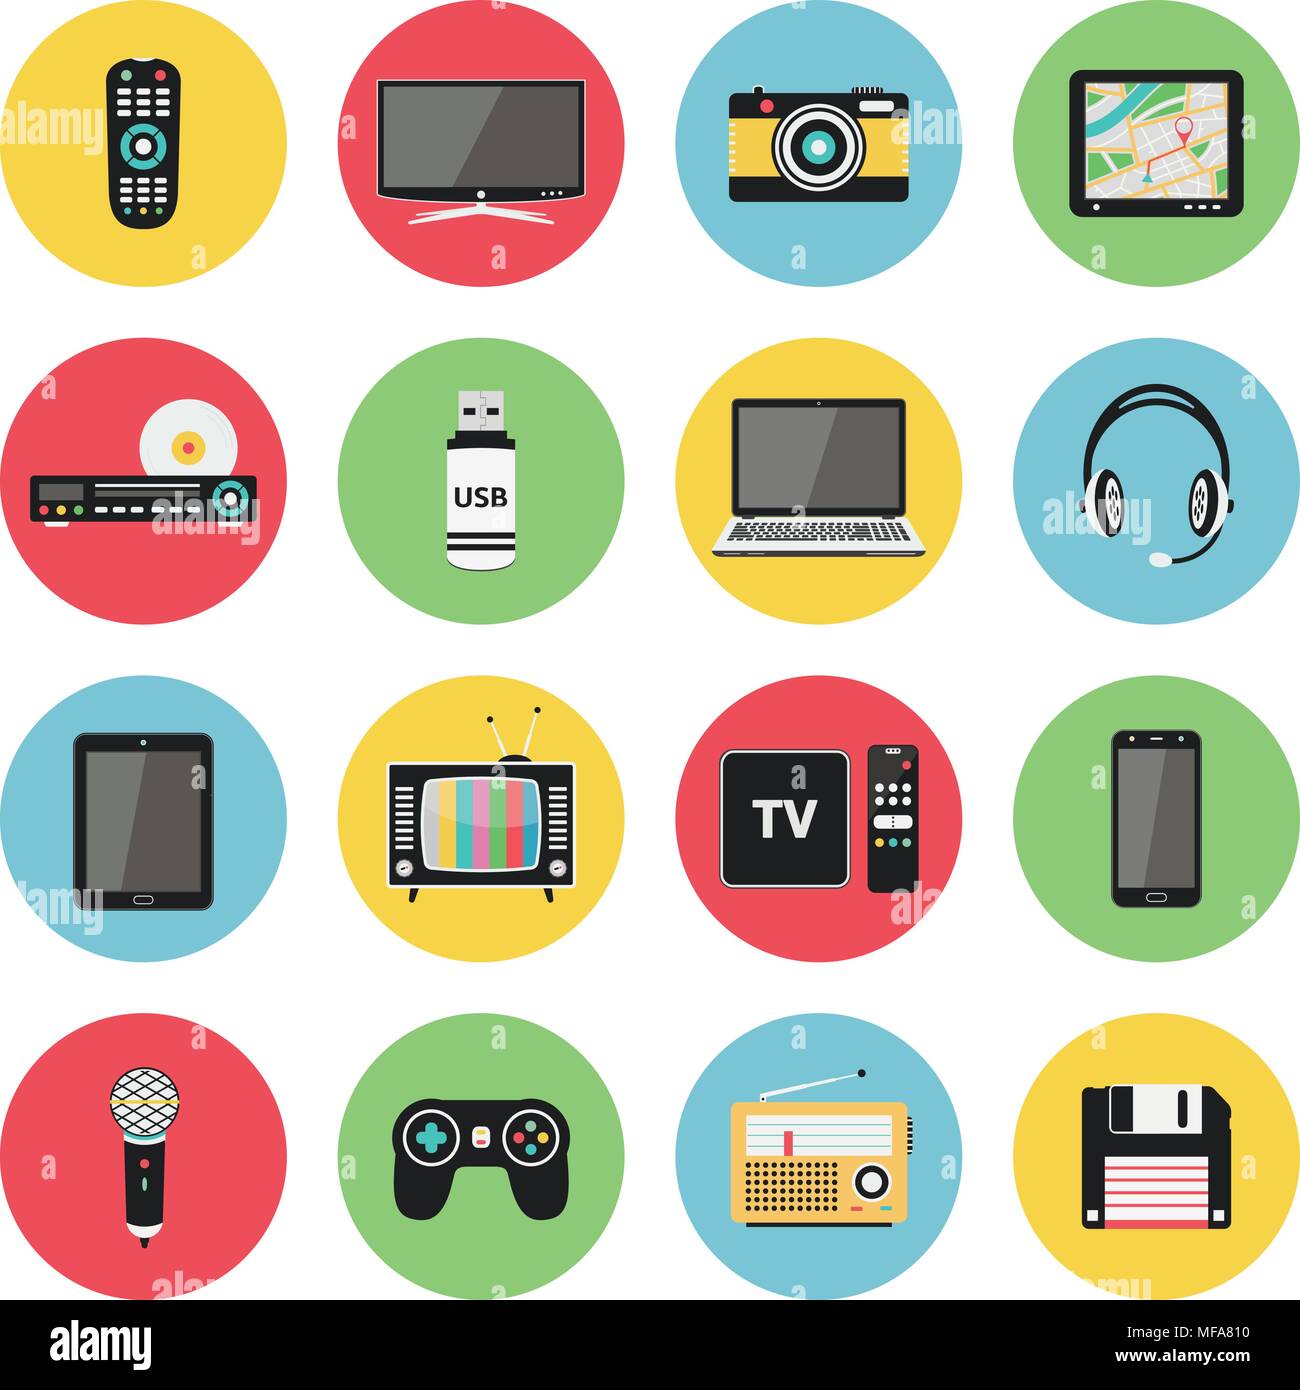 Image Of Technology Devices - technology